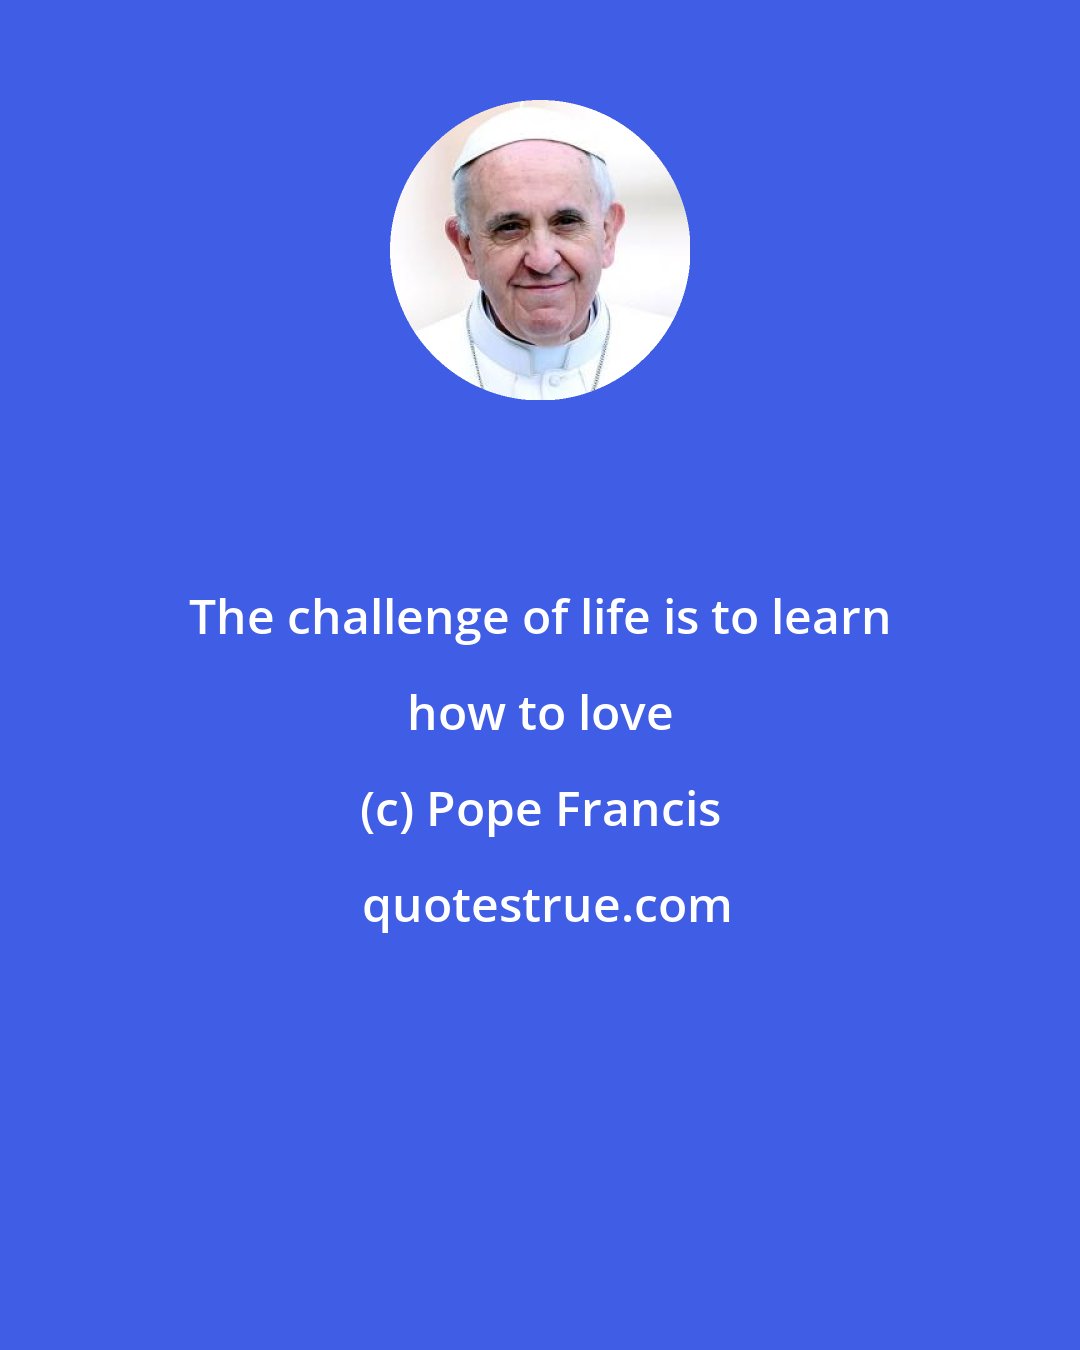 Pope Francis: The challenge of life is to learn how to love